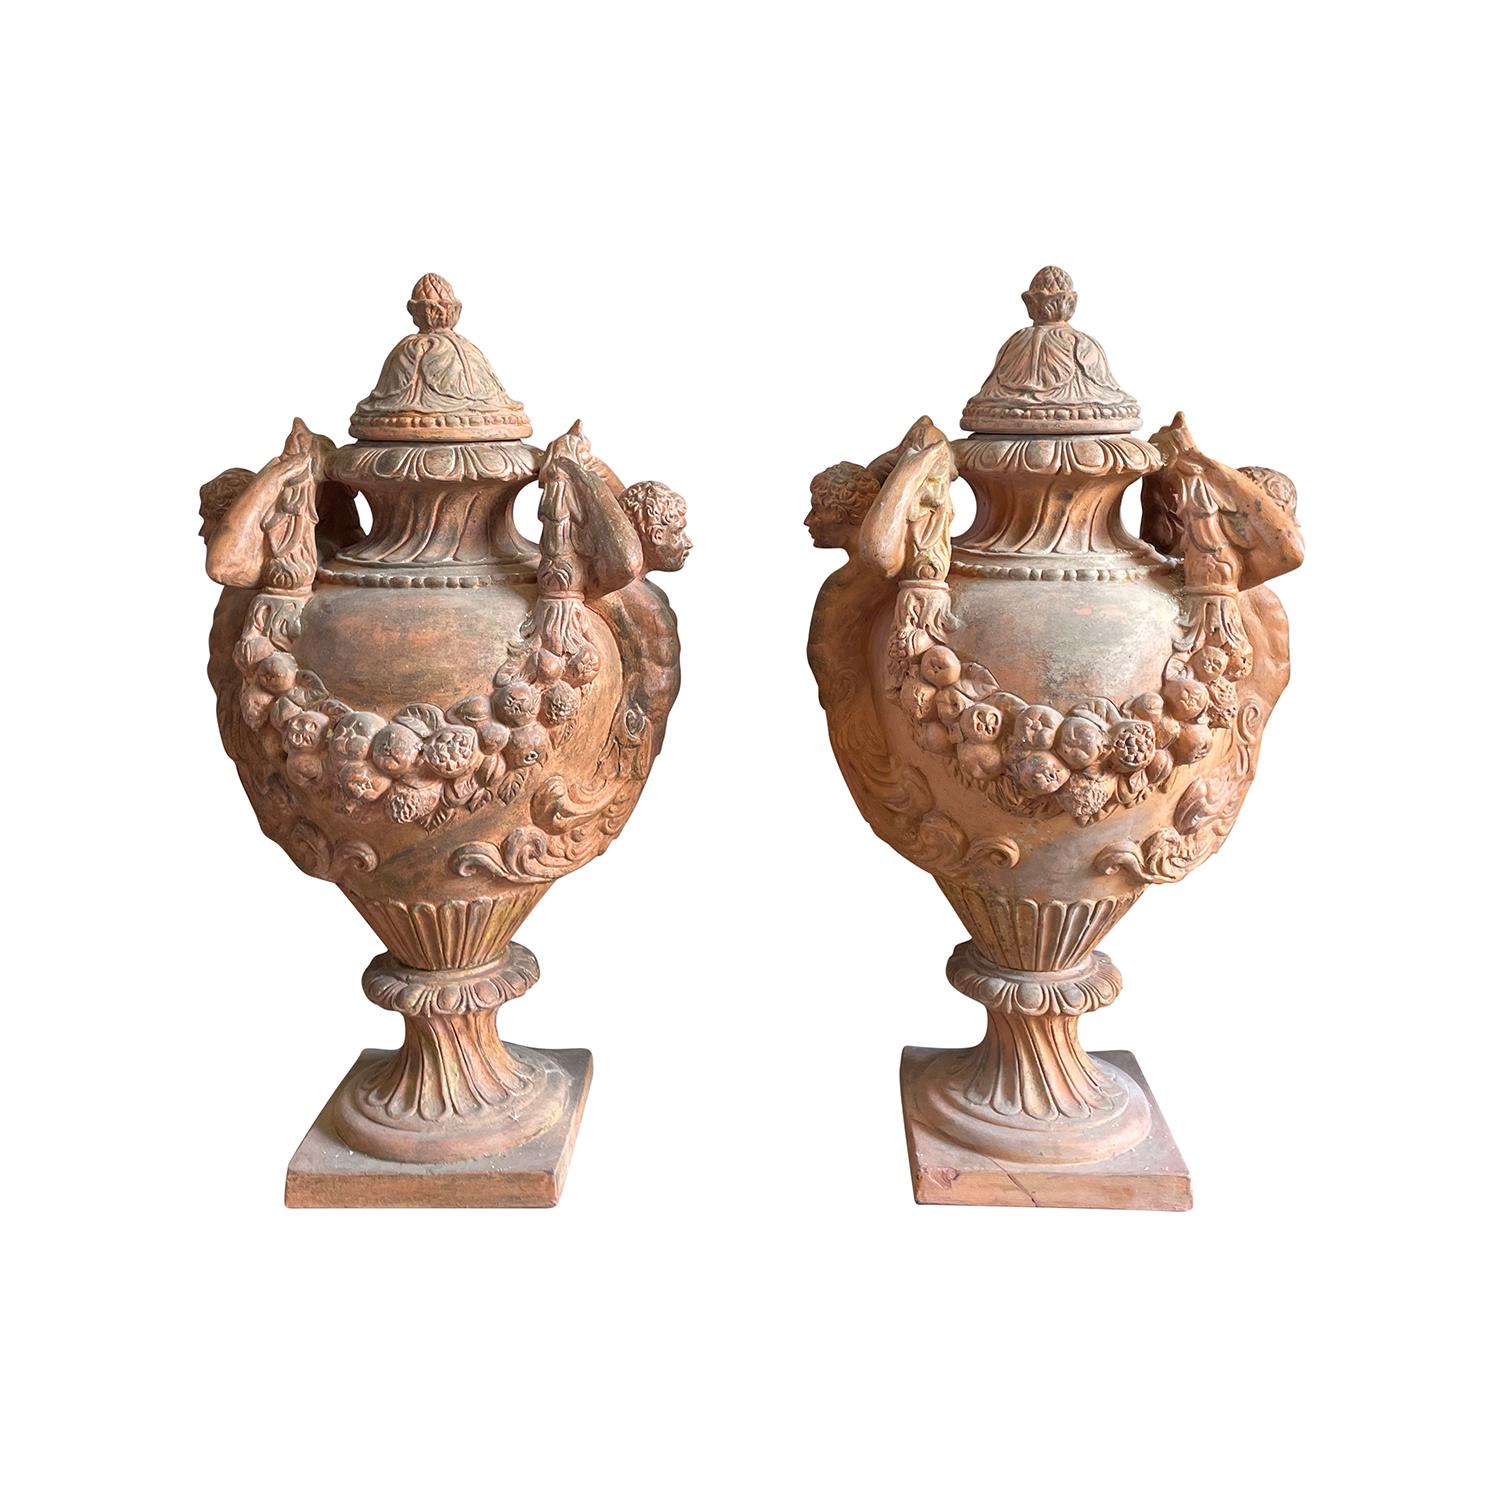 A pair of Renaissance style very ornate antique Italian terra cotta vases decorated with Caryatides and garlands, in good condition. The bodice of the urns is set on a square base. The finials are topped with a lid and with a pomme de pin finials.